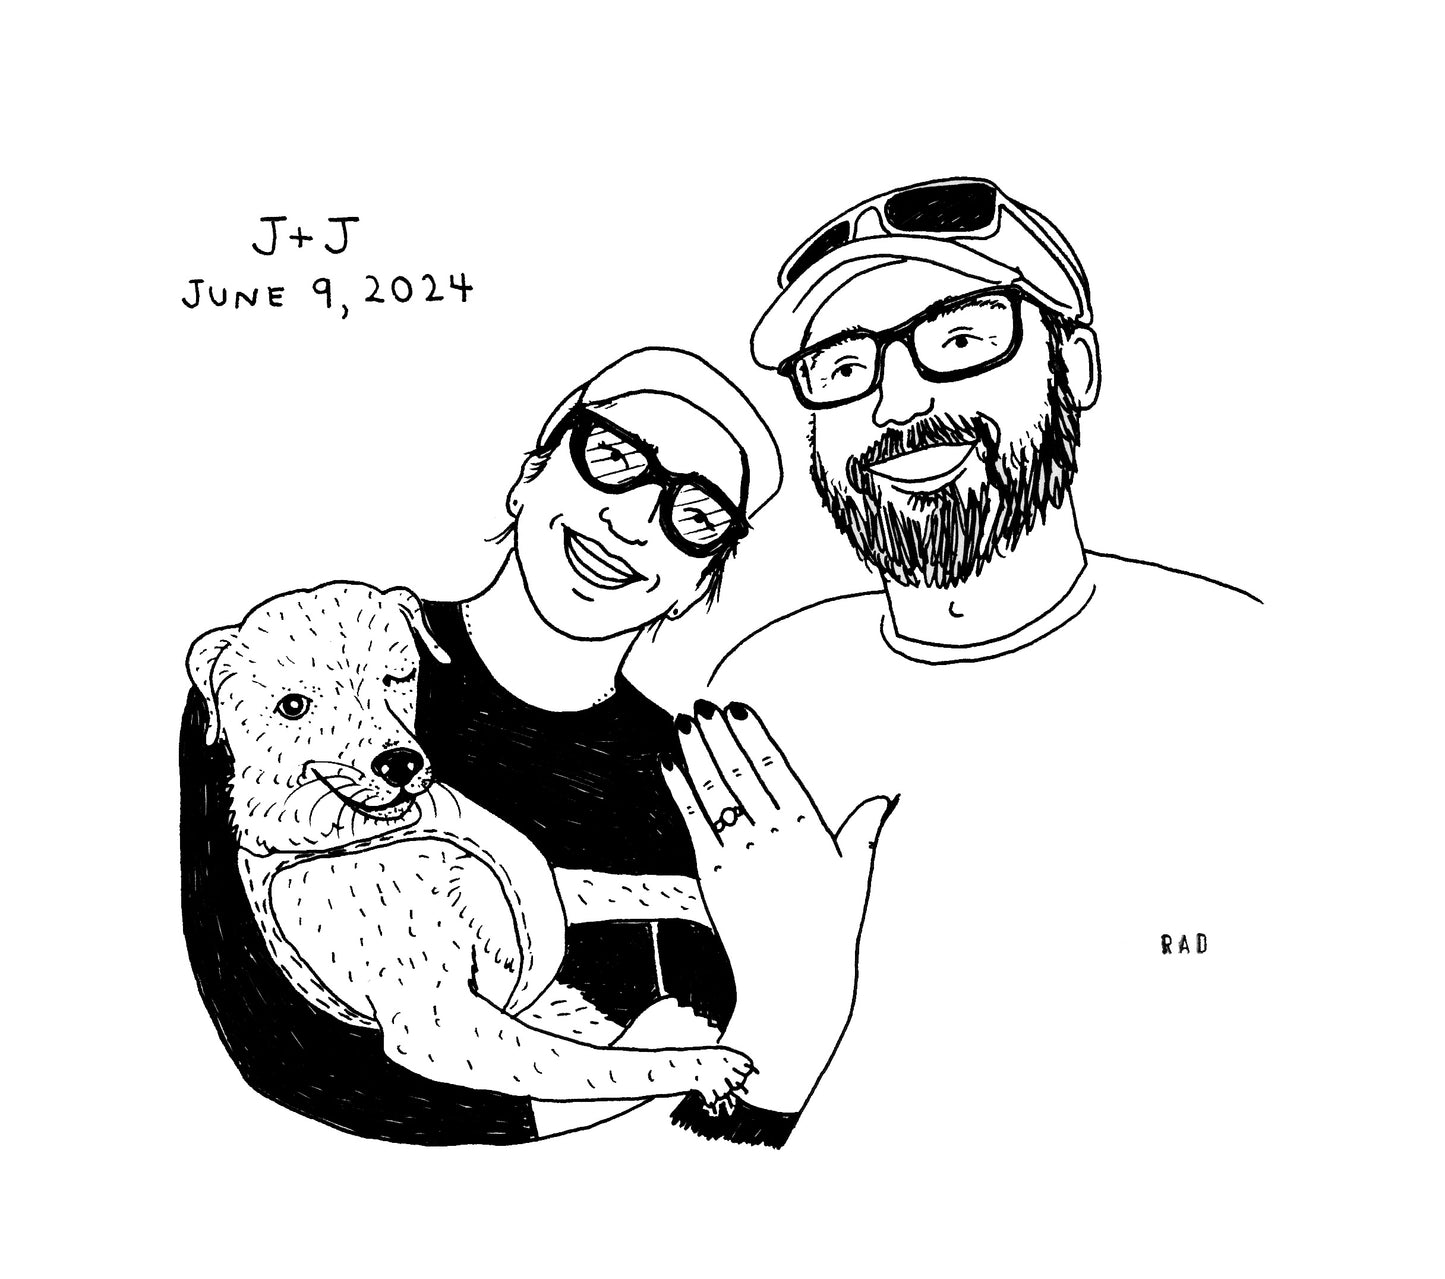 Custom Couple and/or Family Portrait